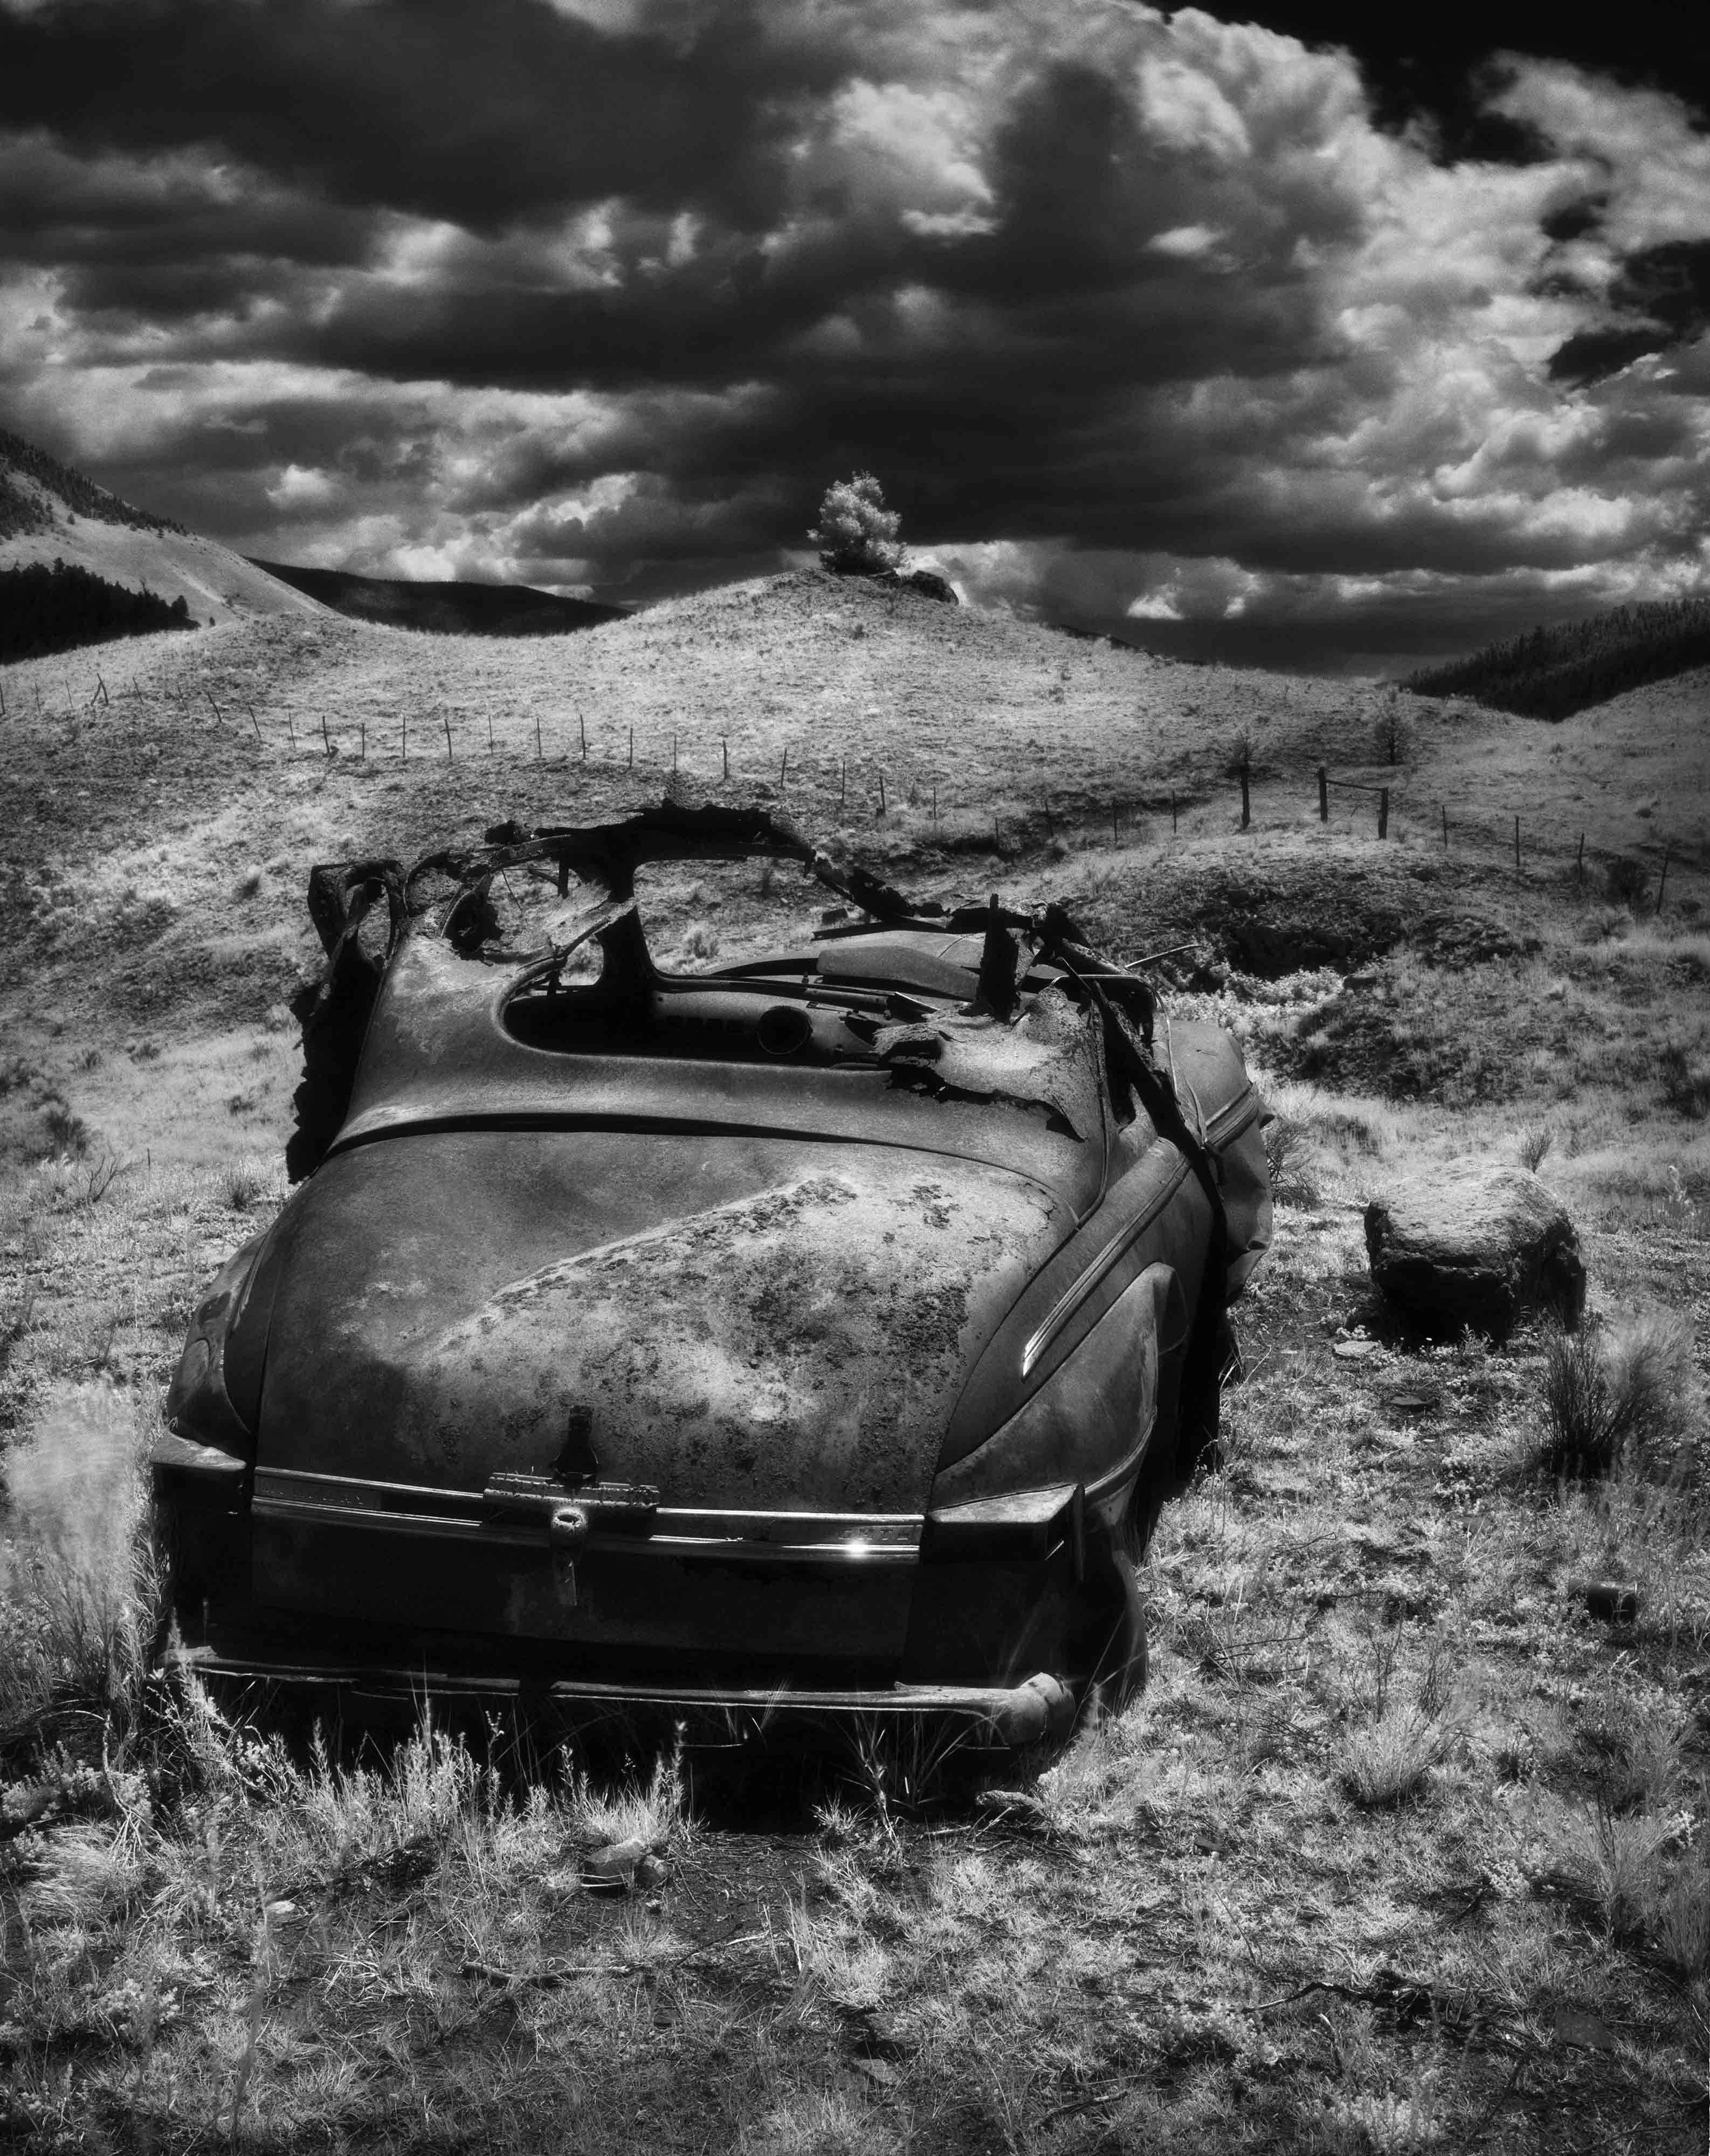 Cody S. Brothers Black and White Photograph - Landscape Photography: 'End of the Road'